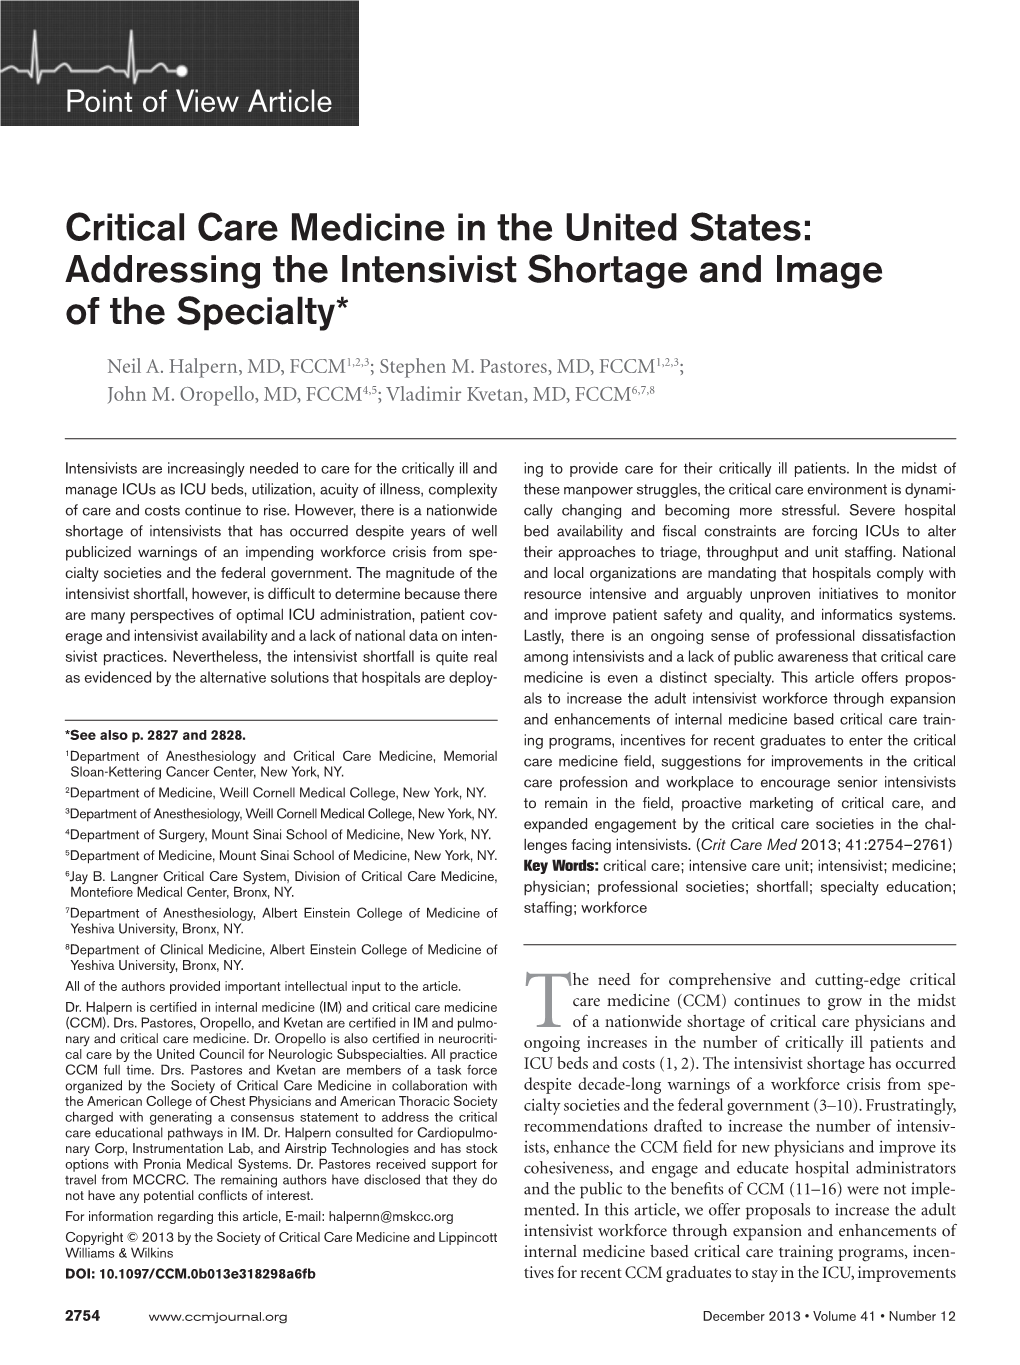 Critical Care Medicine in the United States: Addressing the Intensivist Shortage and Image of the Specialty*